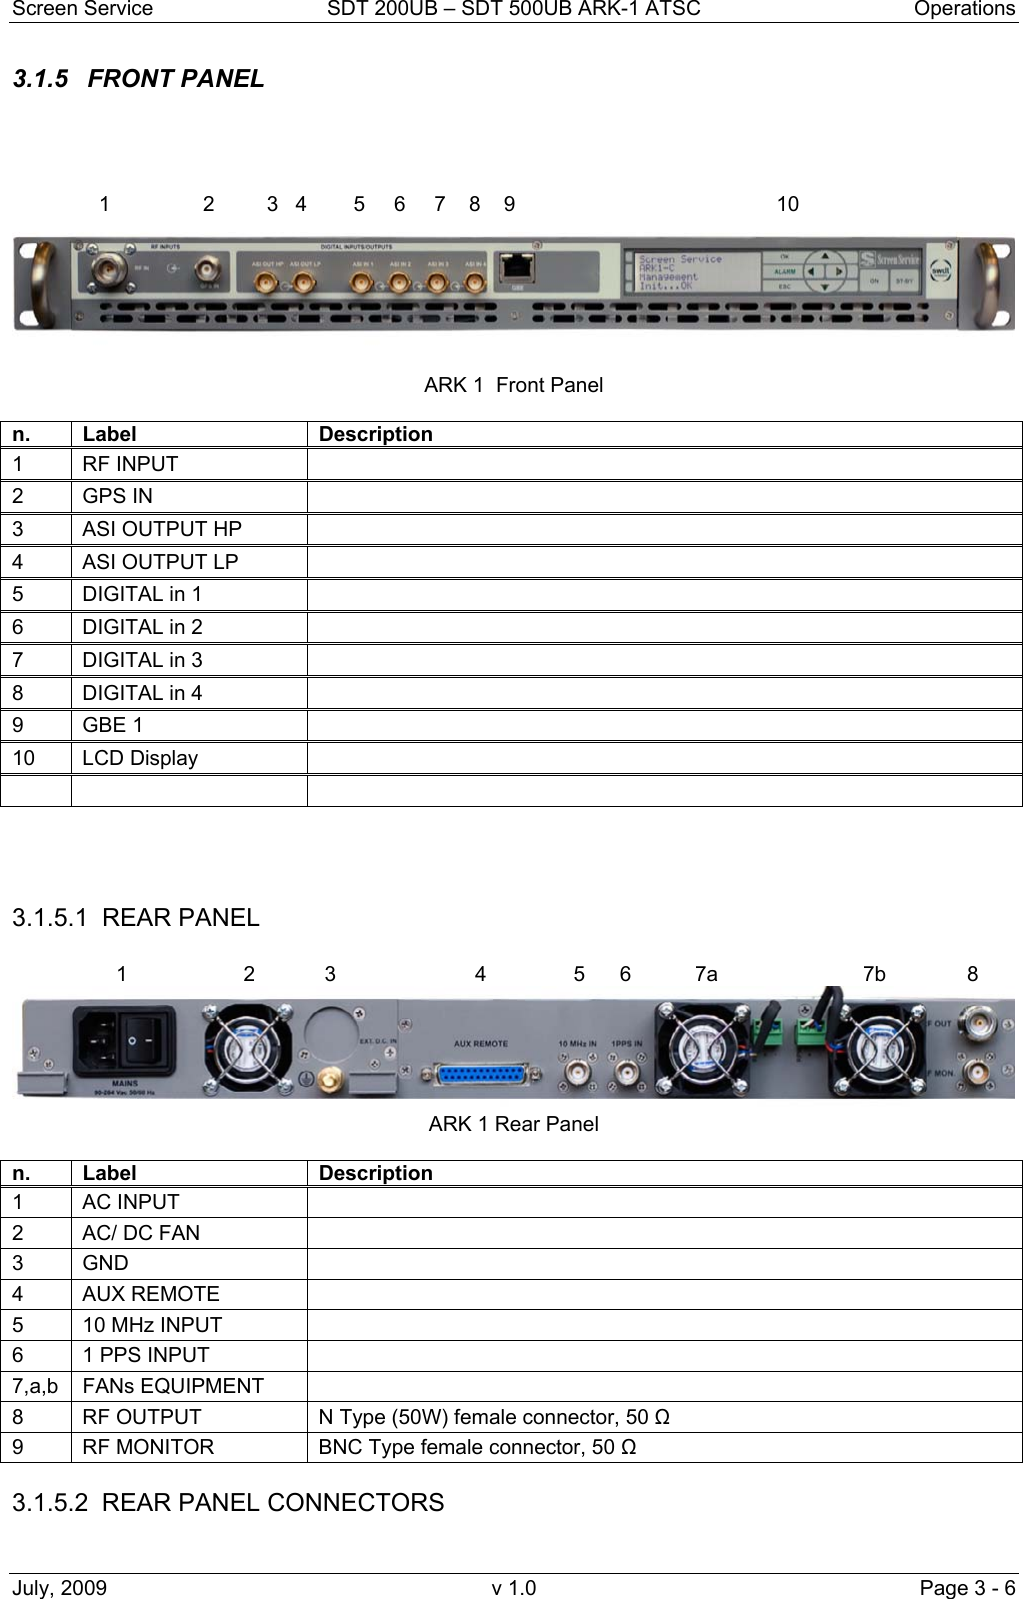 Screen Service  SDT 200UB – SDT 500UB ARK-1 ATSC  Operations July, 2009  v 1.0  Page 3 - 6 3.1.5 FRONT PANEL                  1                2         3   4        5     6     7    8    9                                             10   ARK 1  Front Panel  n.   Label  Description 1 RF INPUT   2 GPS IN   3  ASI OUTPUT HP   4  ASI OUTPUT LP   5  DIGITAL in 1   6  DIGITAL in 2   7  DIGITAL in 3   8  DIGITAL in 4   9 GBE 1   10 LCD Display                                             3.1.5.1 REAR PANEL                    1                    2            3                        4               5      6           7a                         7b              8  ARK 1 Rear Panel  n.   Label  Description 1 AC INPUT   2  AC/ DC FAN   3 GND   4 AUX REMOTE   5  10 MHz INPUT   6  1 PPS INPUT   7,a,b FANs EQUIPMENT   8  RF OUTPUT  N Type (50W) female connector, 50 Ω 9  RF MONITOR  BNC Type female connector, 50 Ω 3.1.5.2  REAR PANEL CONNECTORS  